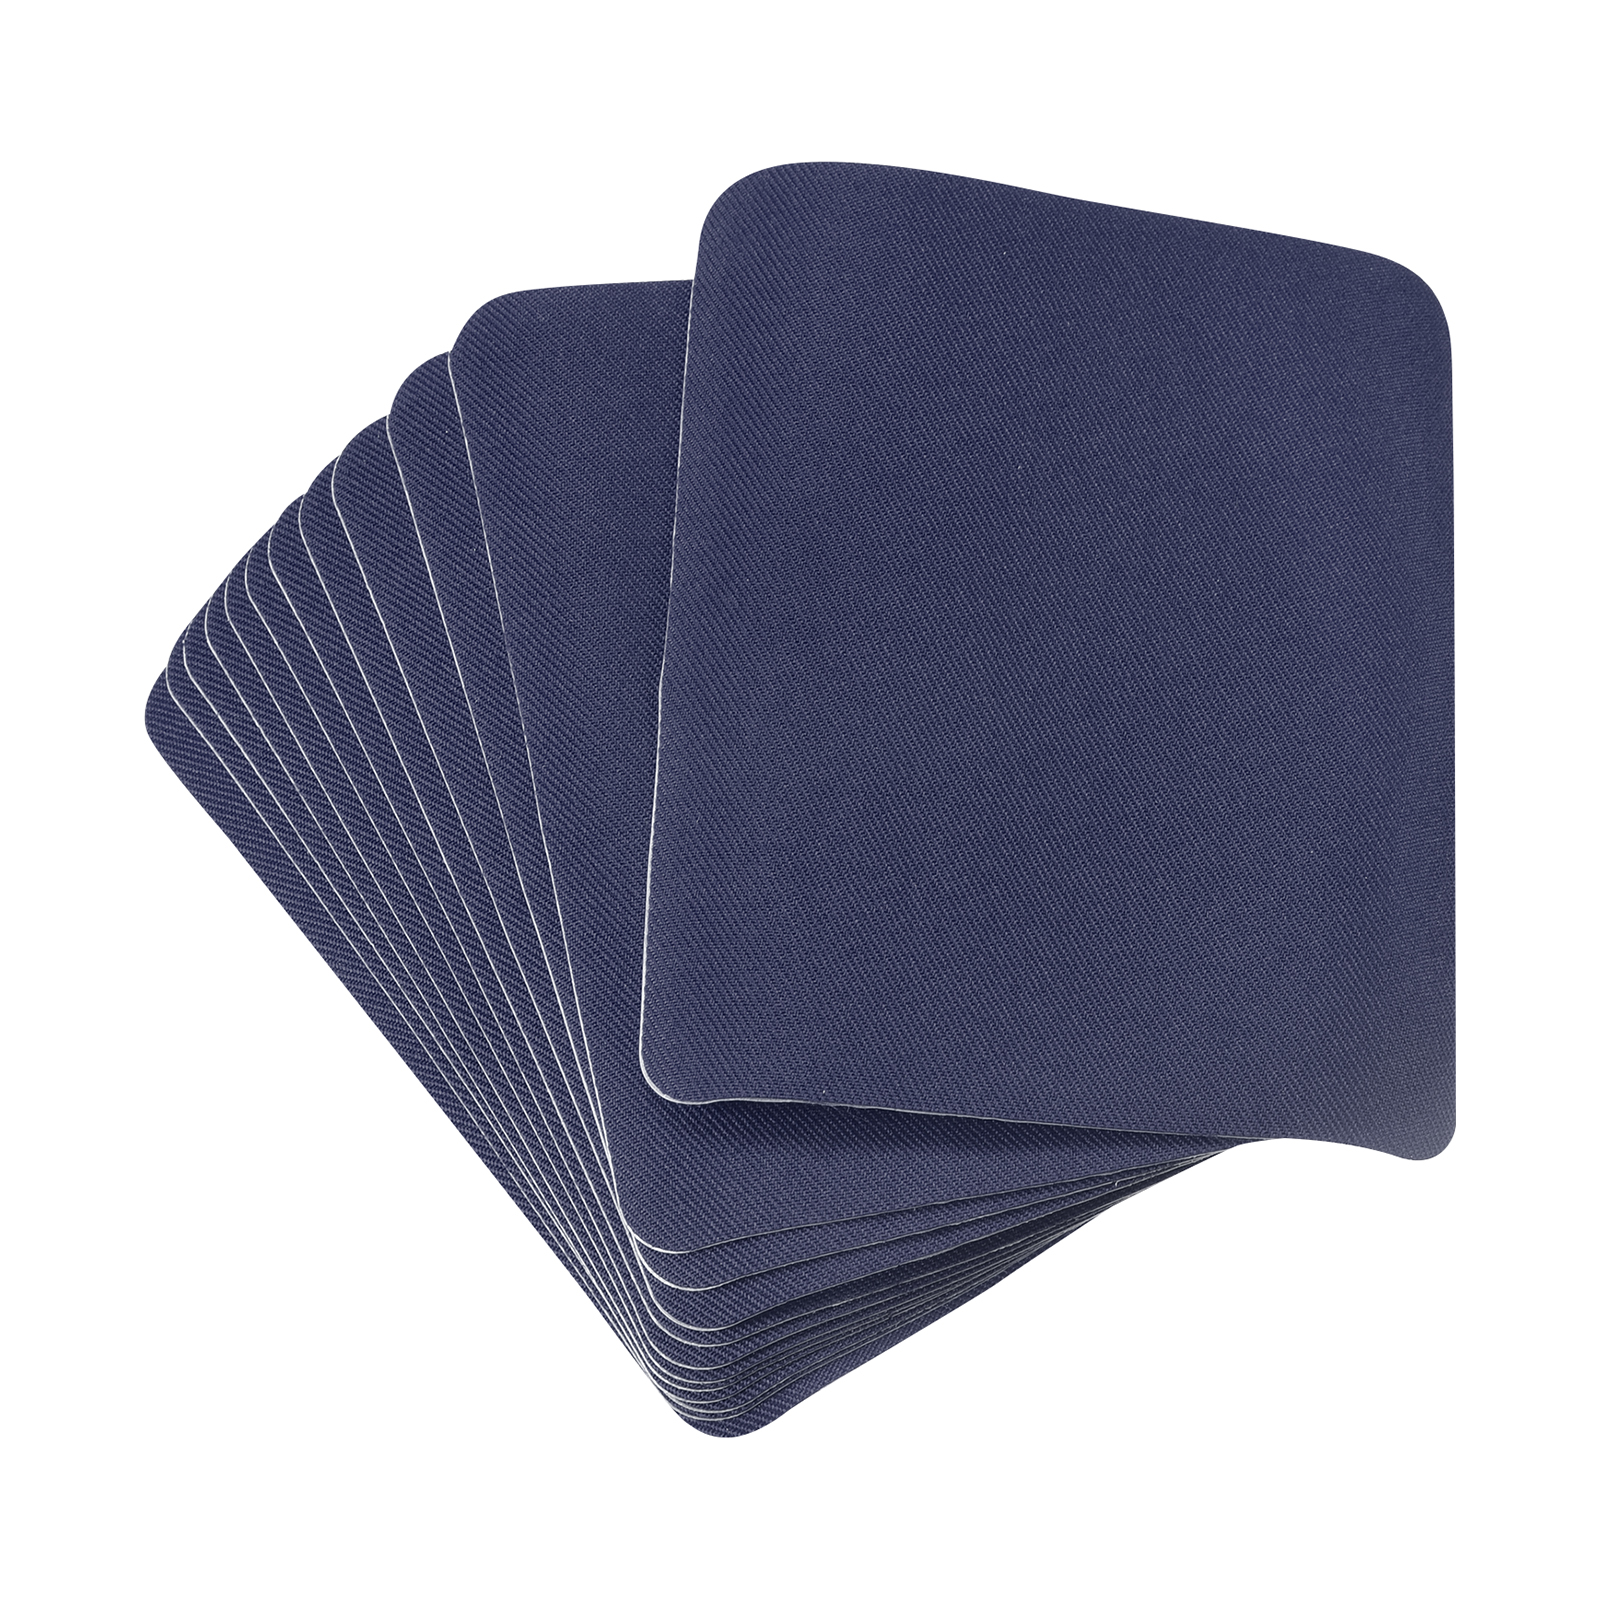 Fabric Patch Iron-on Patches Navy Blue 4.9x3.7 for Clothes, Pants, Bags  Hole Pack of 20